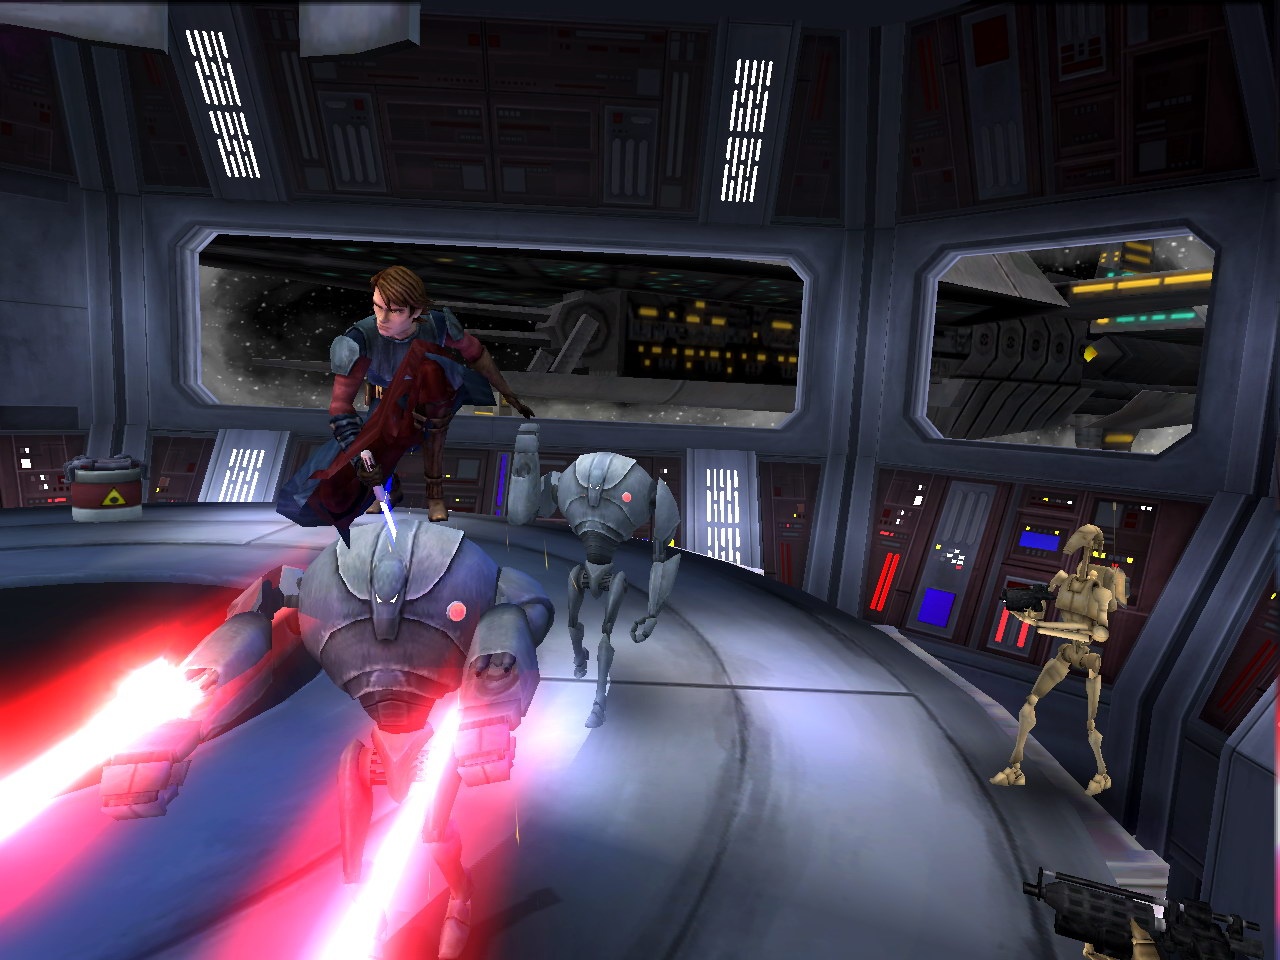 You can assume control of battle droids by skewering them with your lightsaber. Who knew?